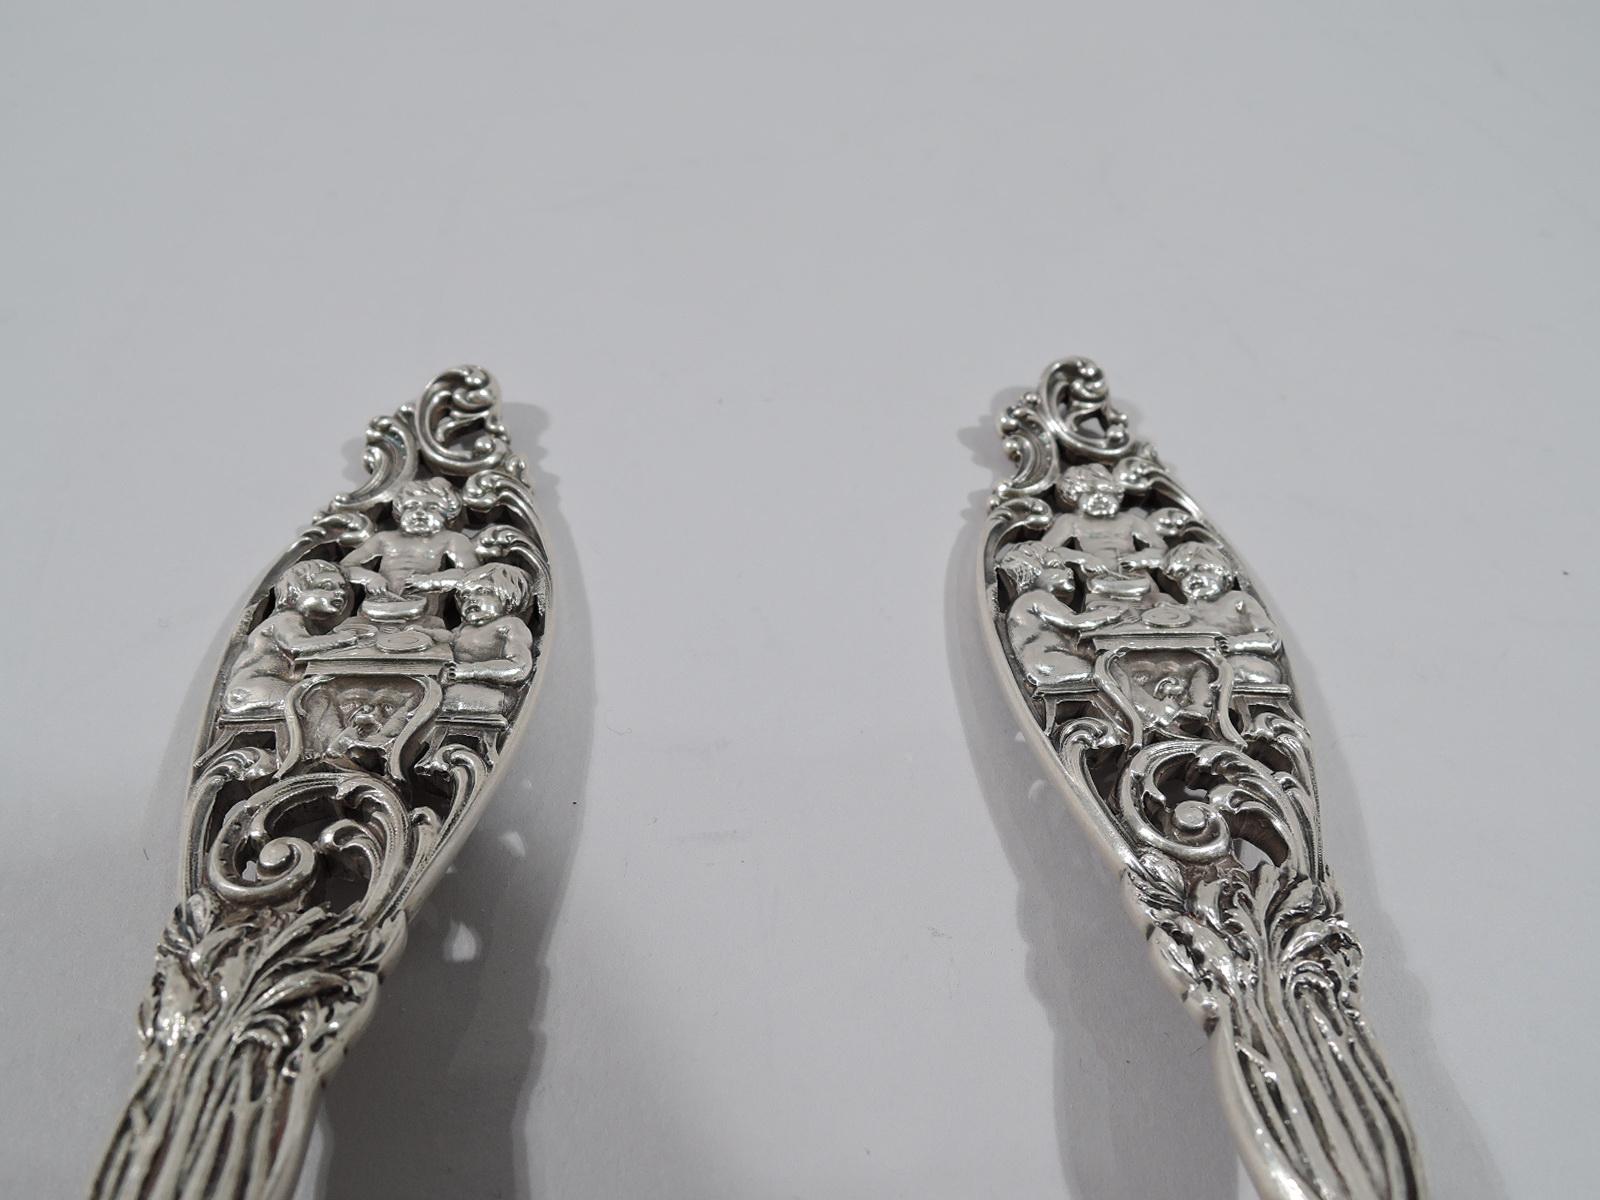 Labors of Cupid sterling silver salad servers. Made by Dominick & Haff in New York, circa 1900. This set comprises spoon and fork. Each stem scrolled and shaped with leaf and flower. Each terminal scrolled and pierced, and inset with 3 chubby